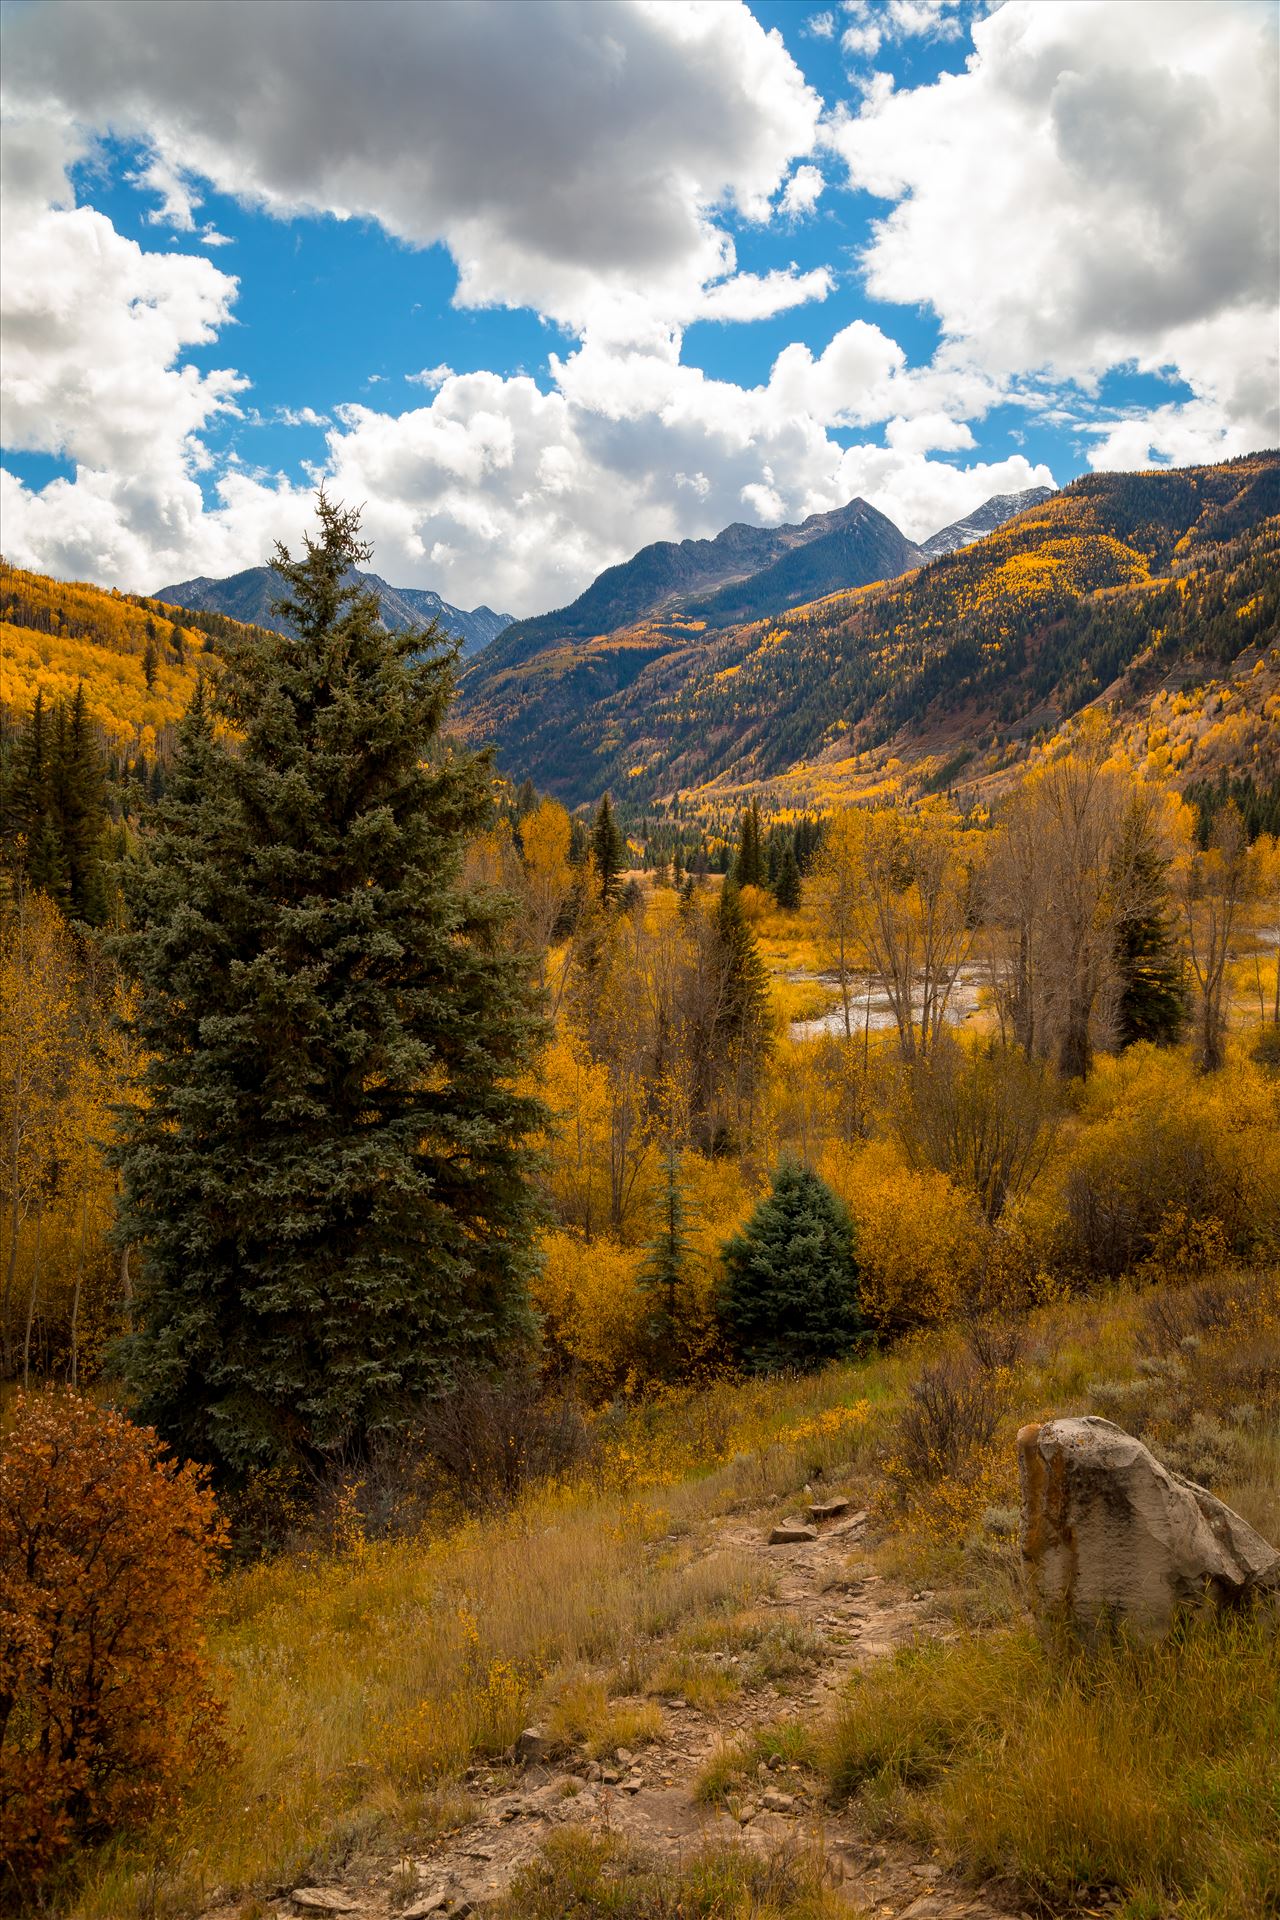 Fall Hiking Near Redstone, Colorado - A trailhead between Marble and Redstone, Colorado. by Scott Smith Photos